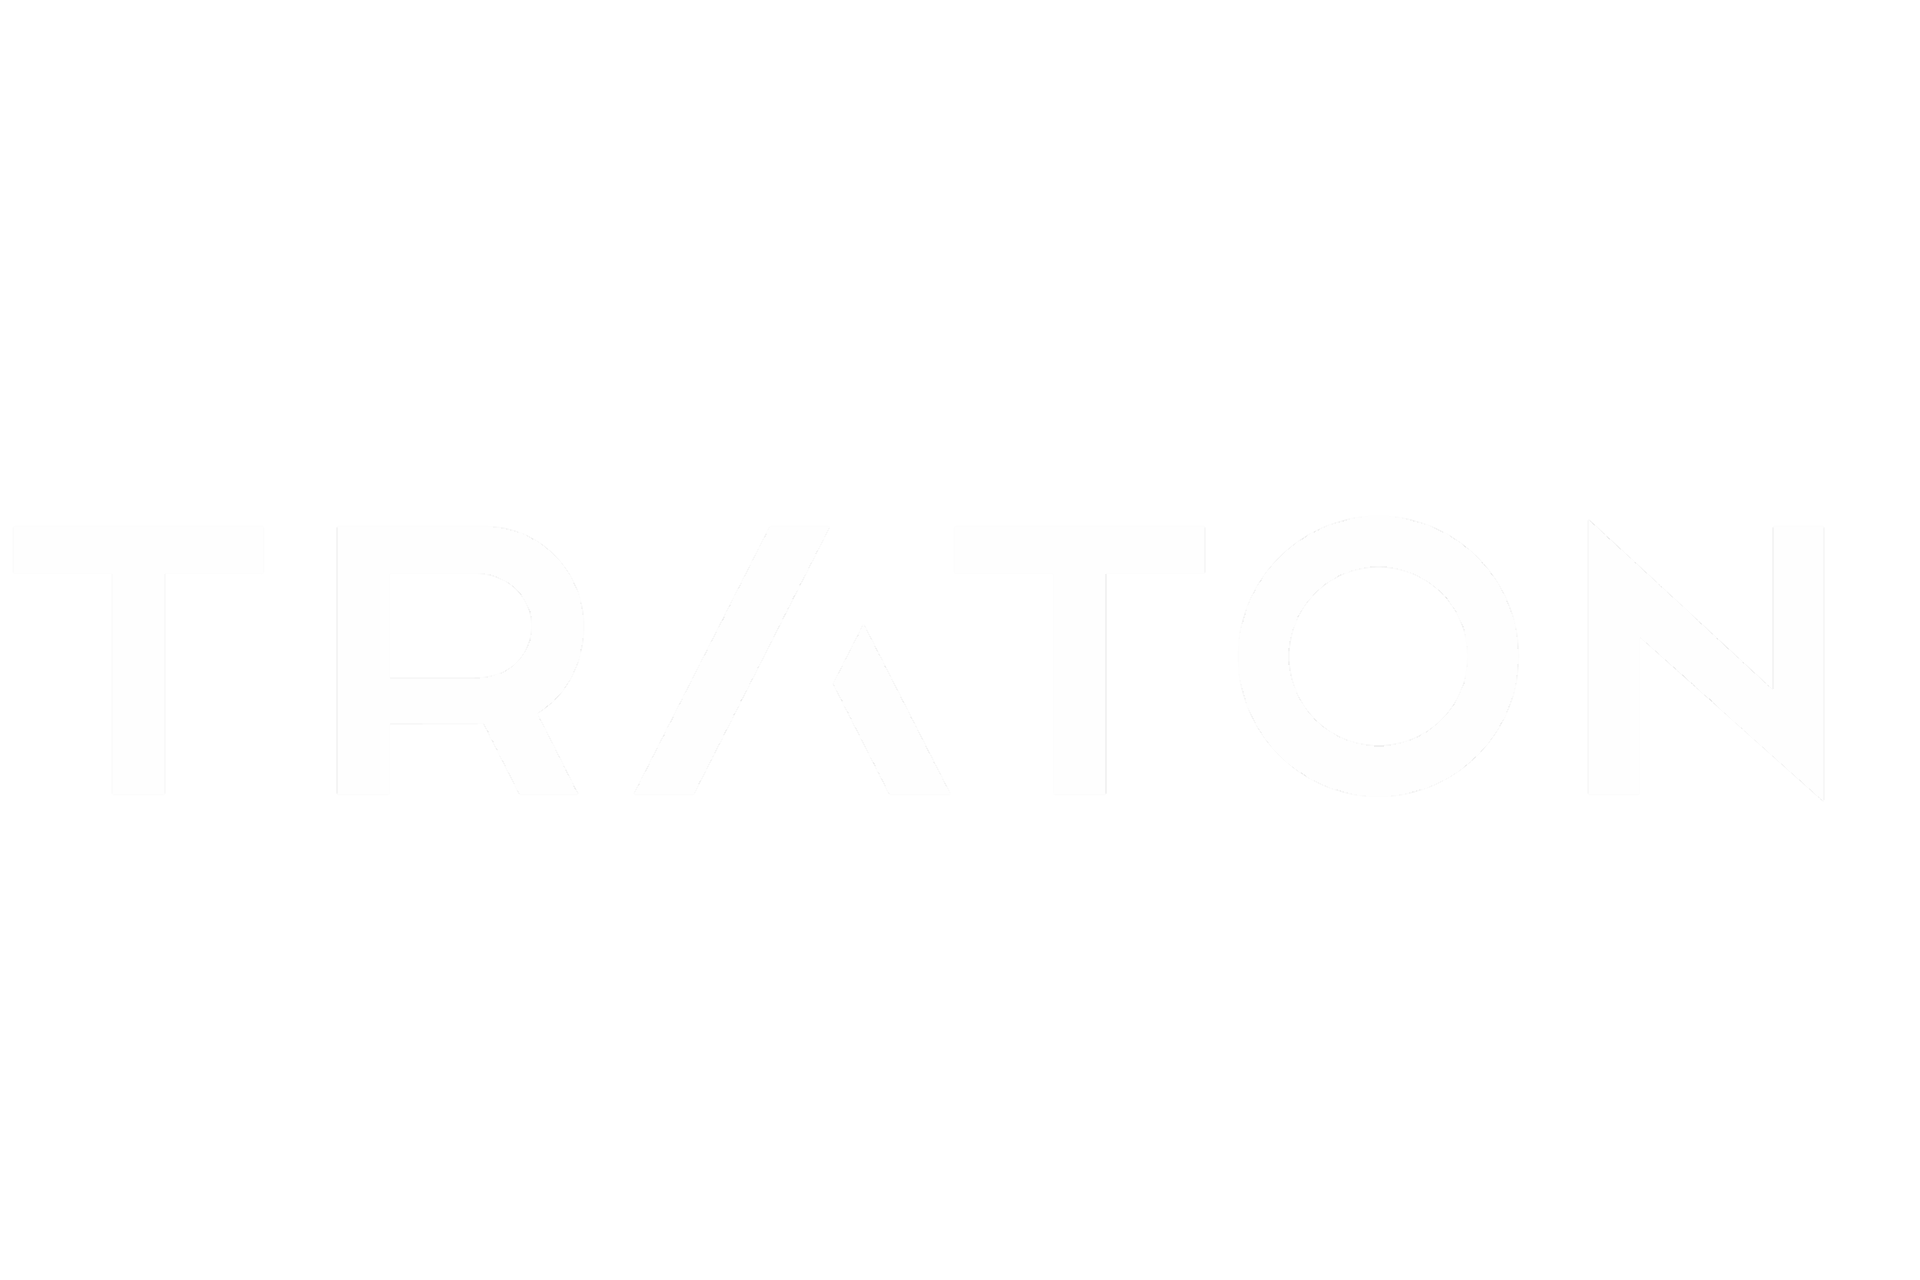 PNG of TRATONs logo in white
                 